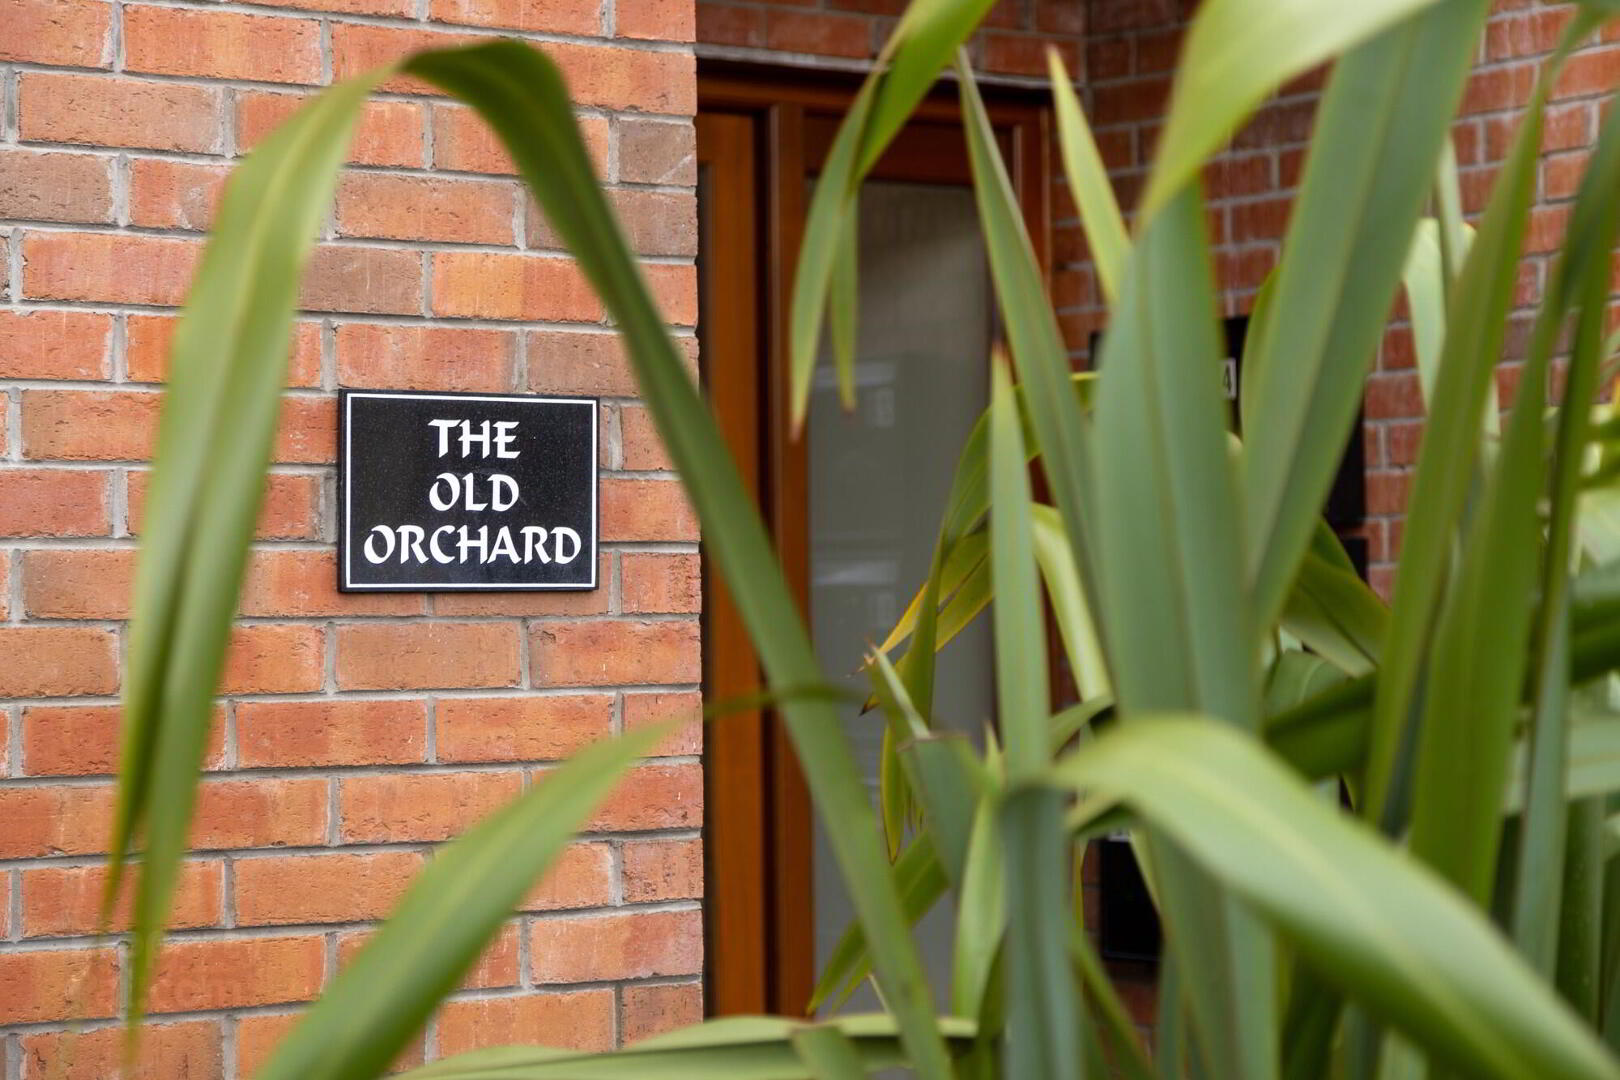 10 The Old Orchard